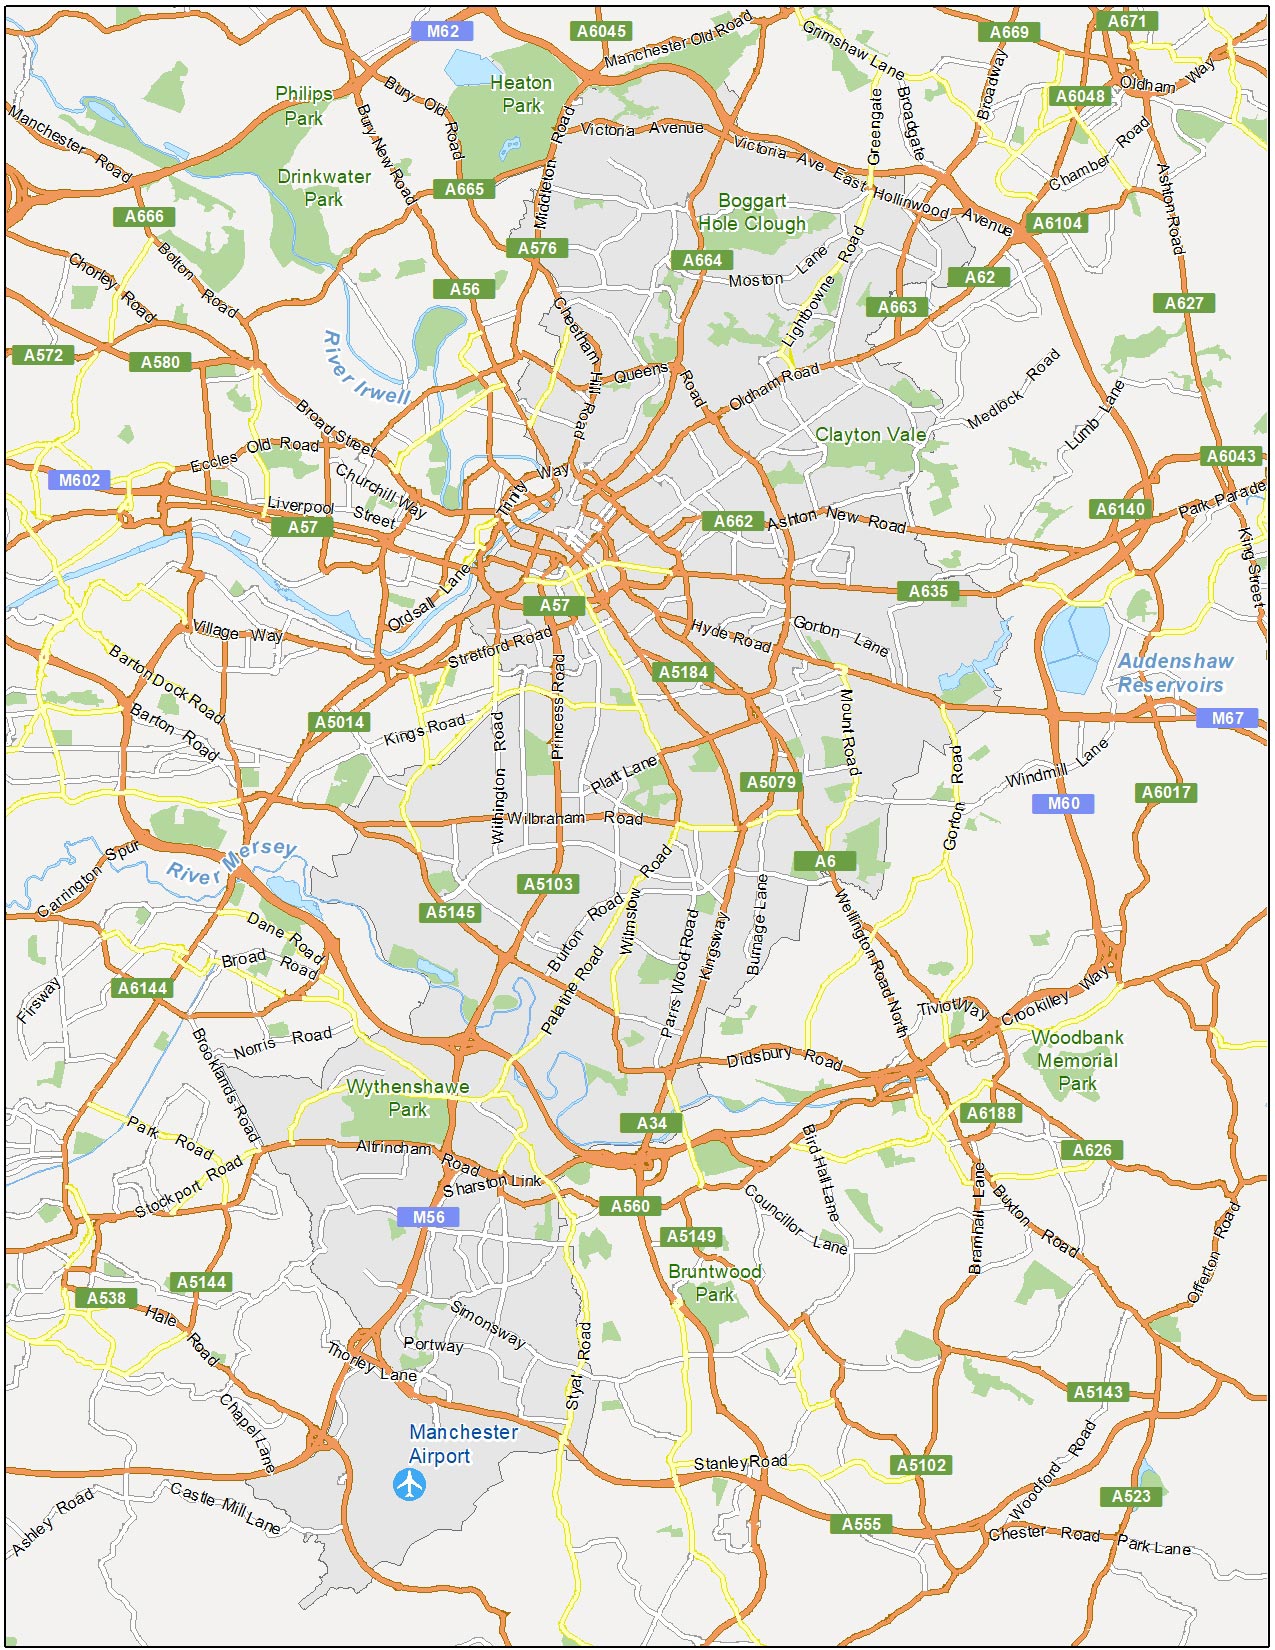 Manchester, History, Population, Map, & Facts